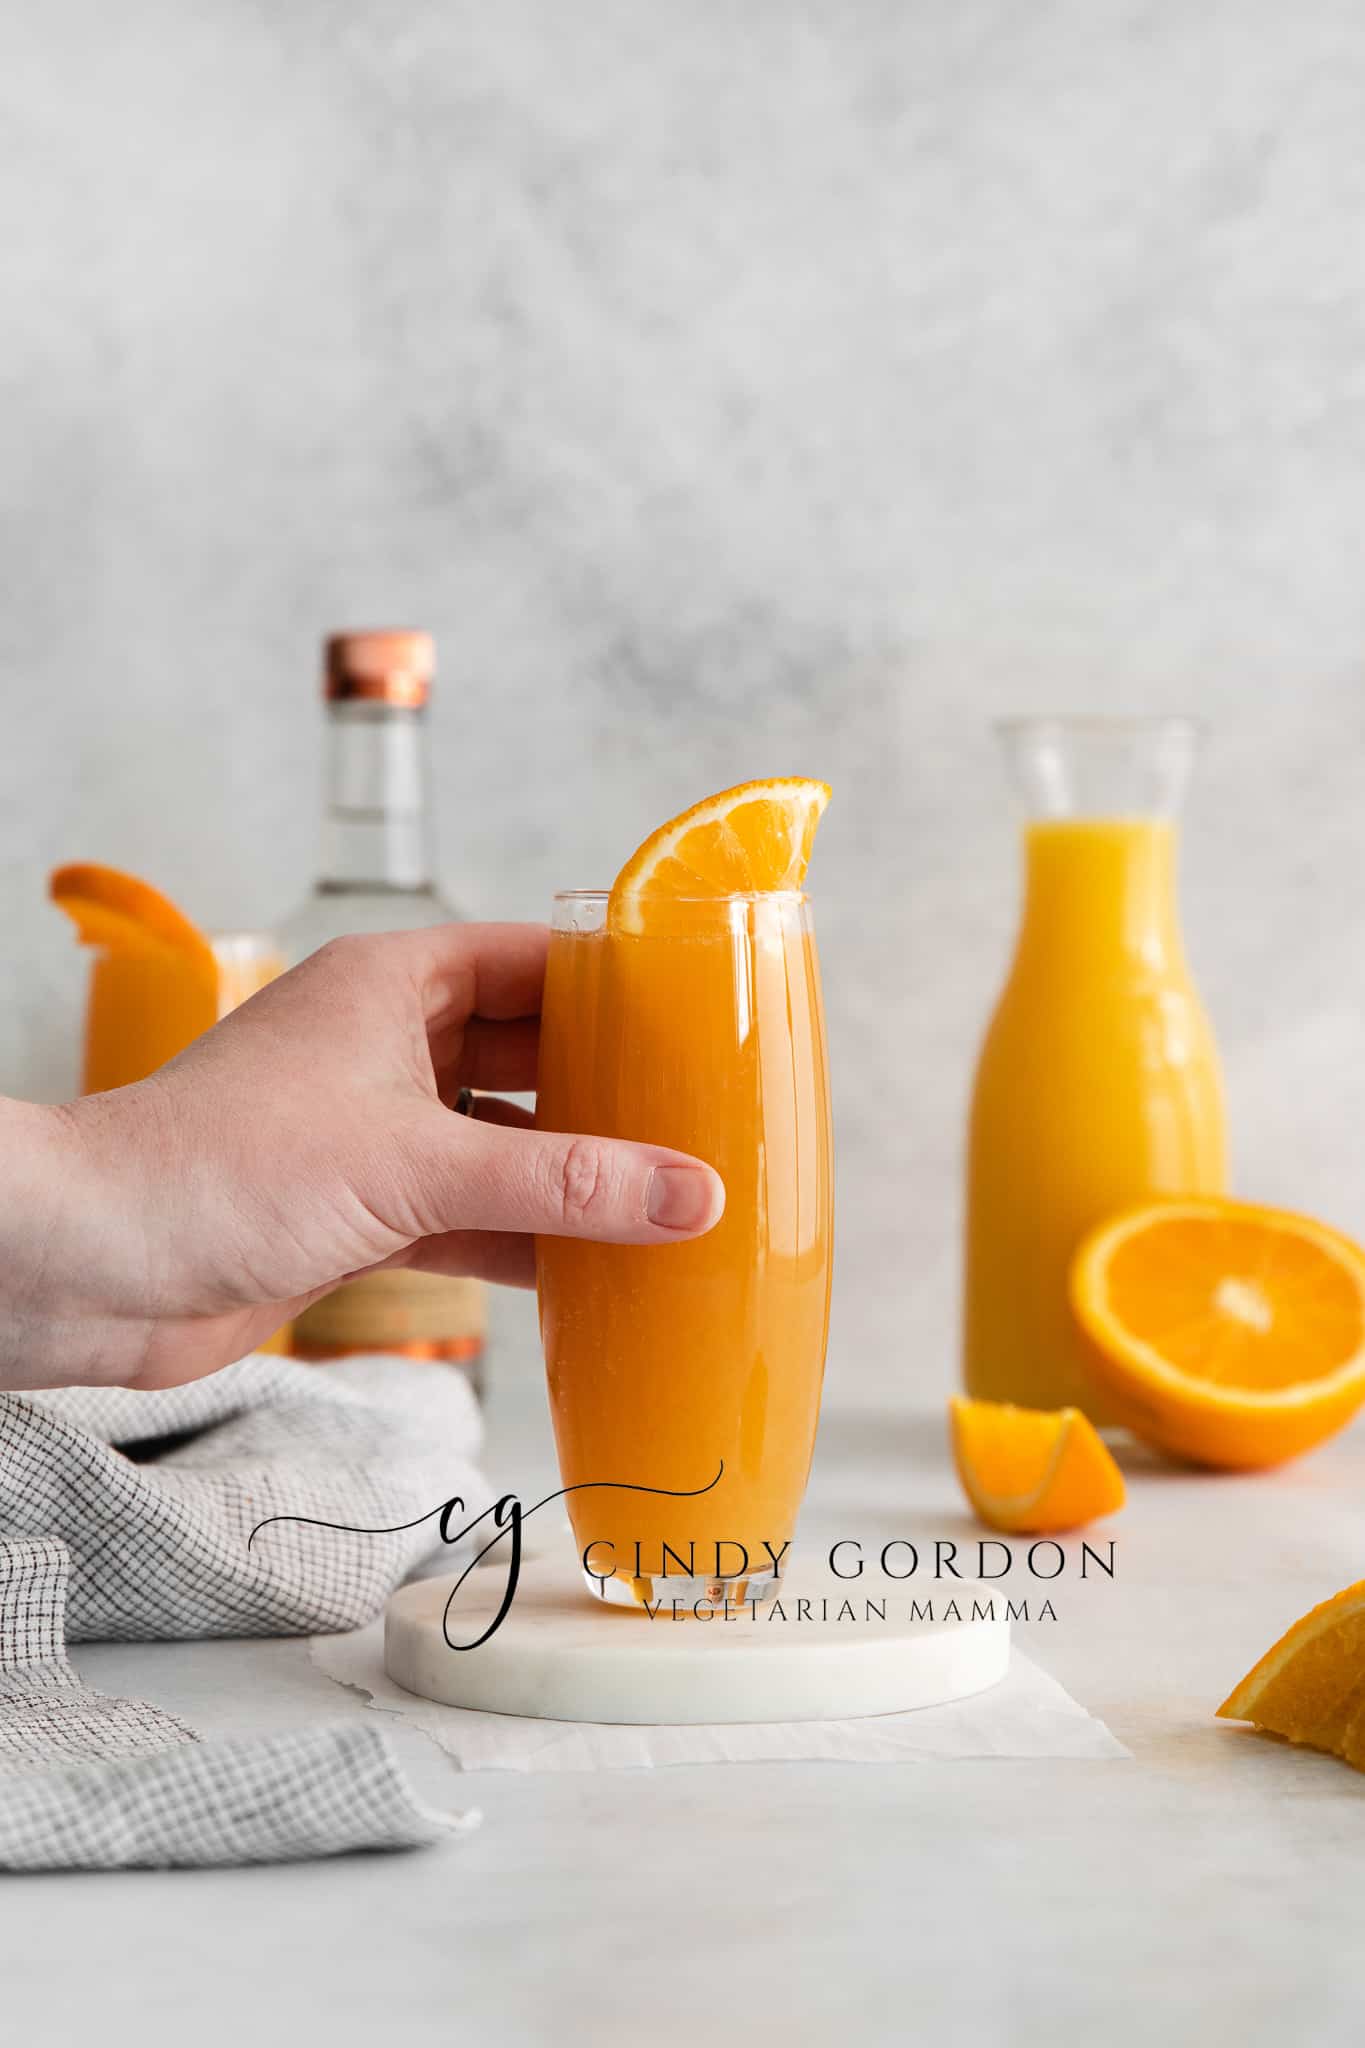 two tall clear glasses filled with orange liquid and topped with an orange slice. cut orange in back ground with a vodka bottle and orange juice jar. hand holding of the orange juice glasses